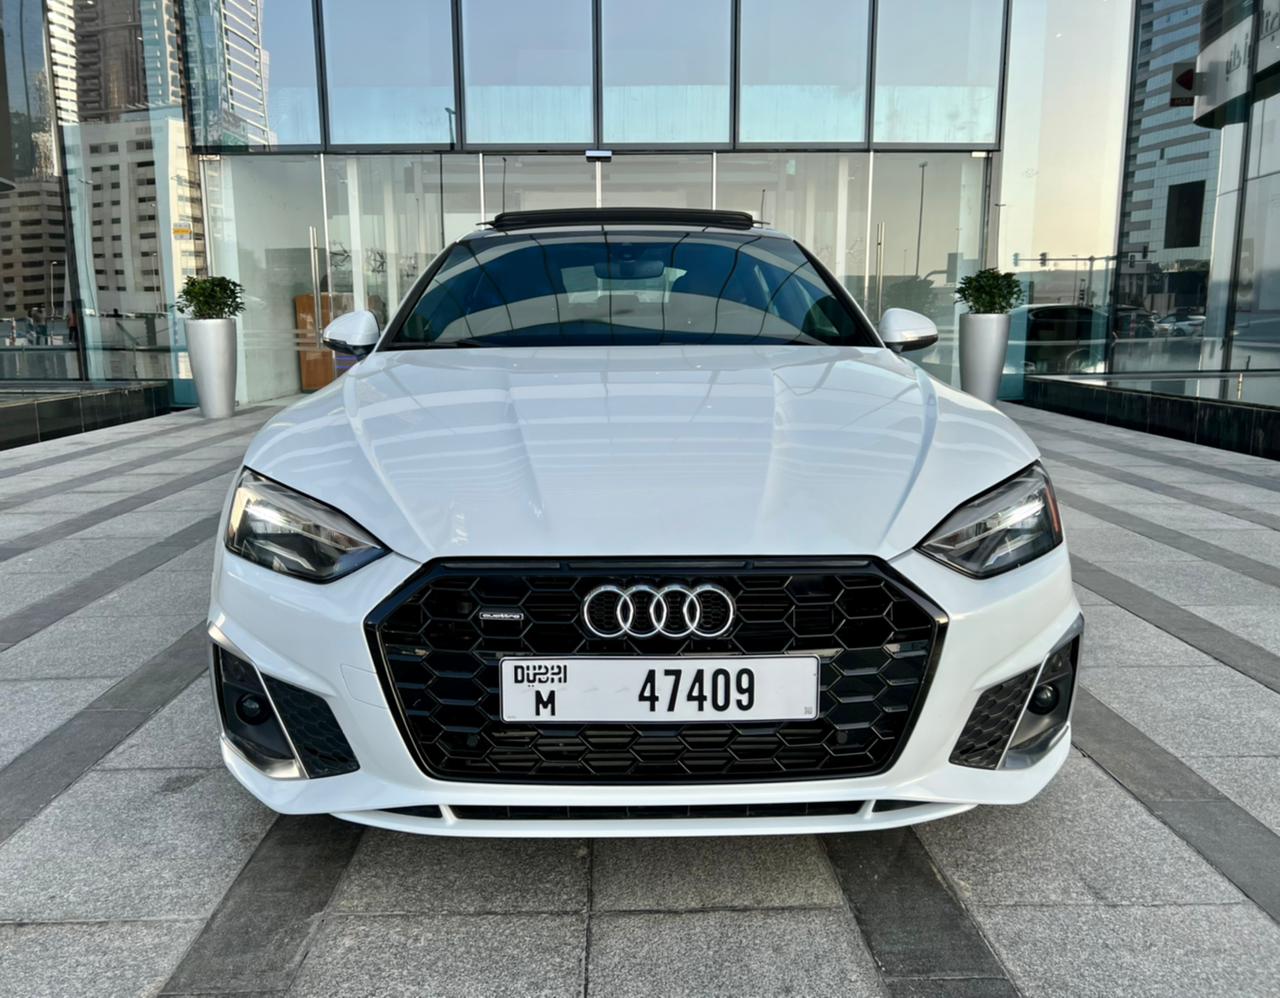 AUDI A5 2021 Listed By Class Cars Rental